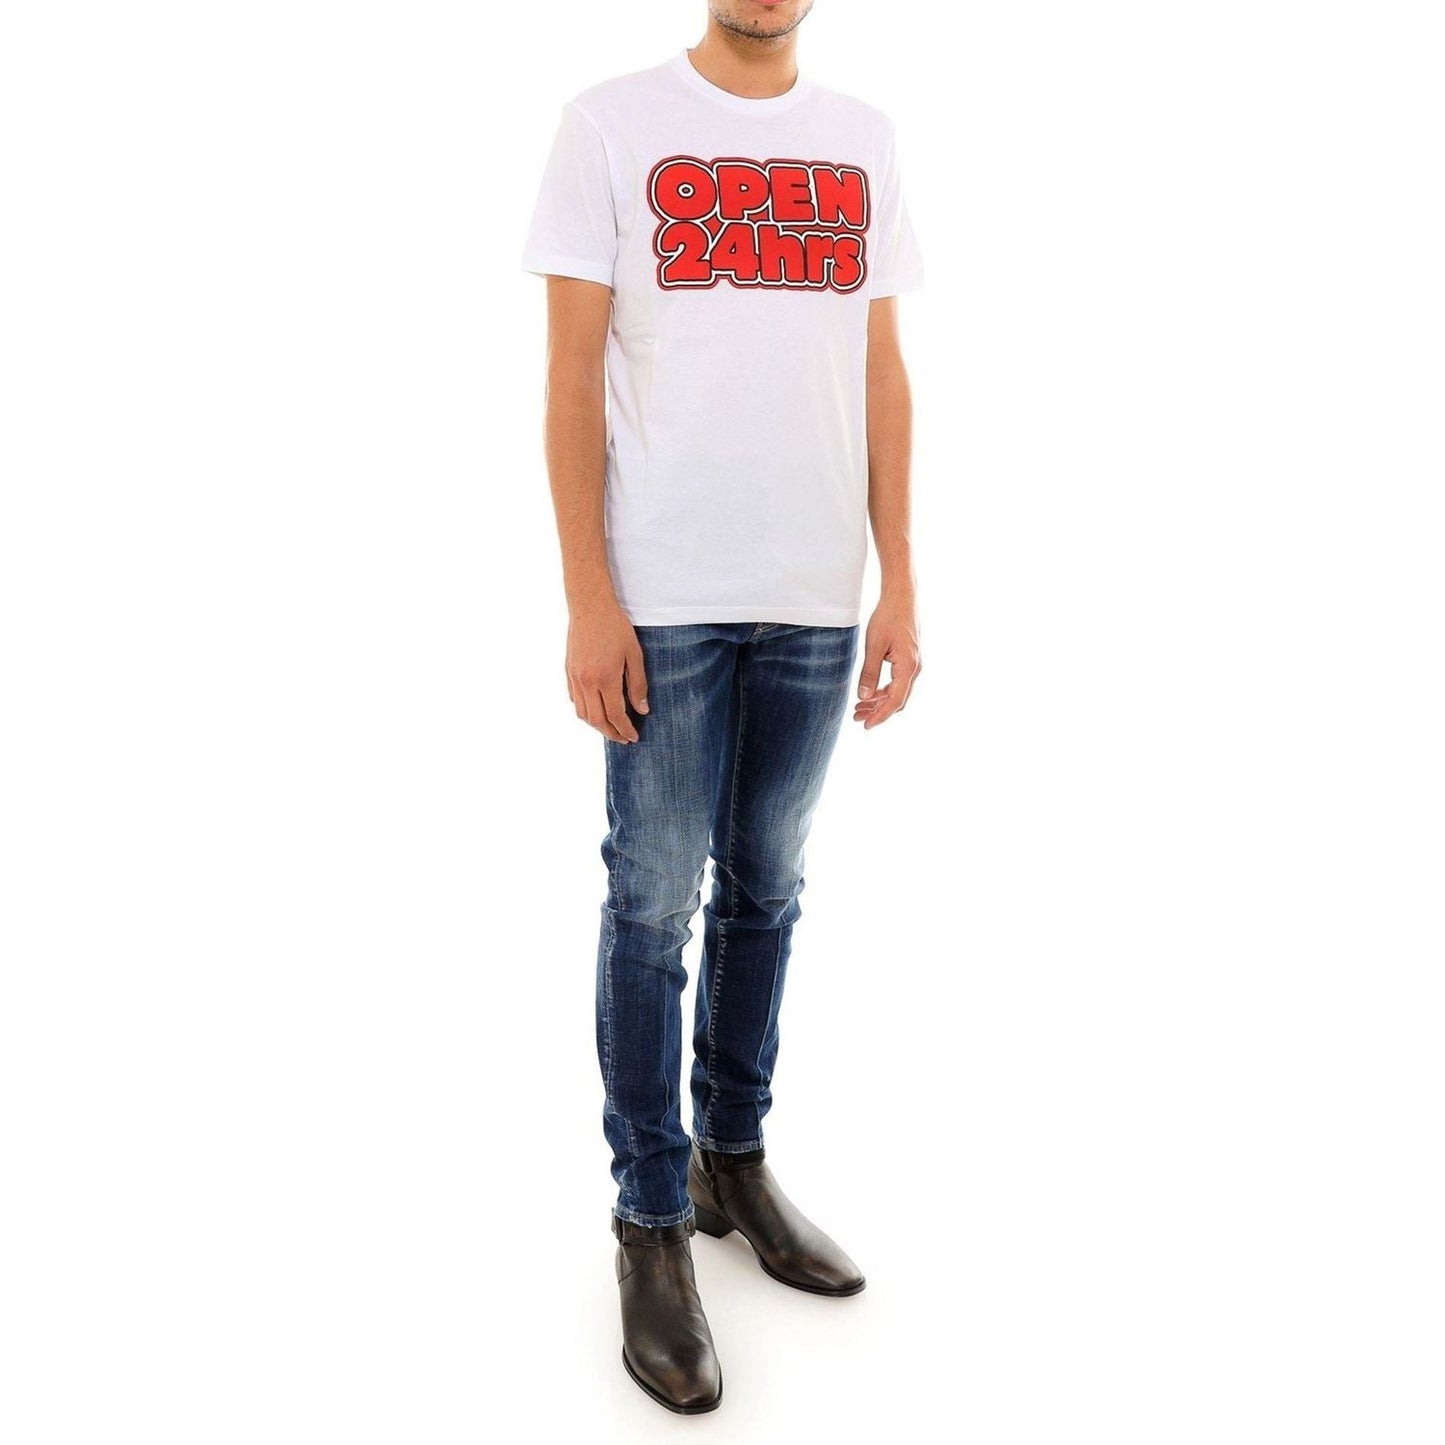 Dsquared² Elevated White Cotton Roundneck T-Shirt s-dsquared-t-shirt-1 stock_product_image_6137_26964646-2-2ffe342e-211.jpg